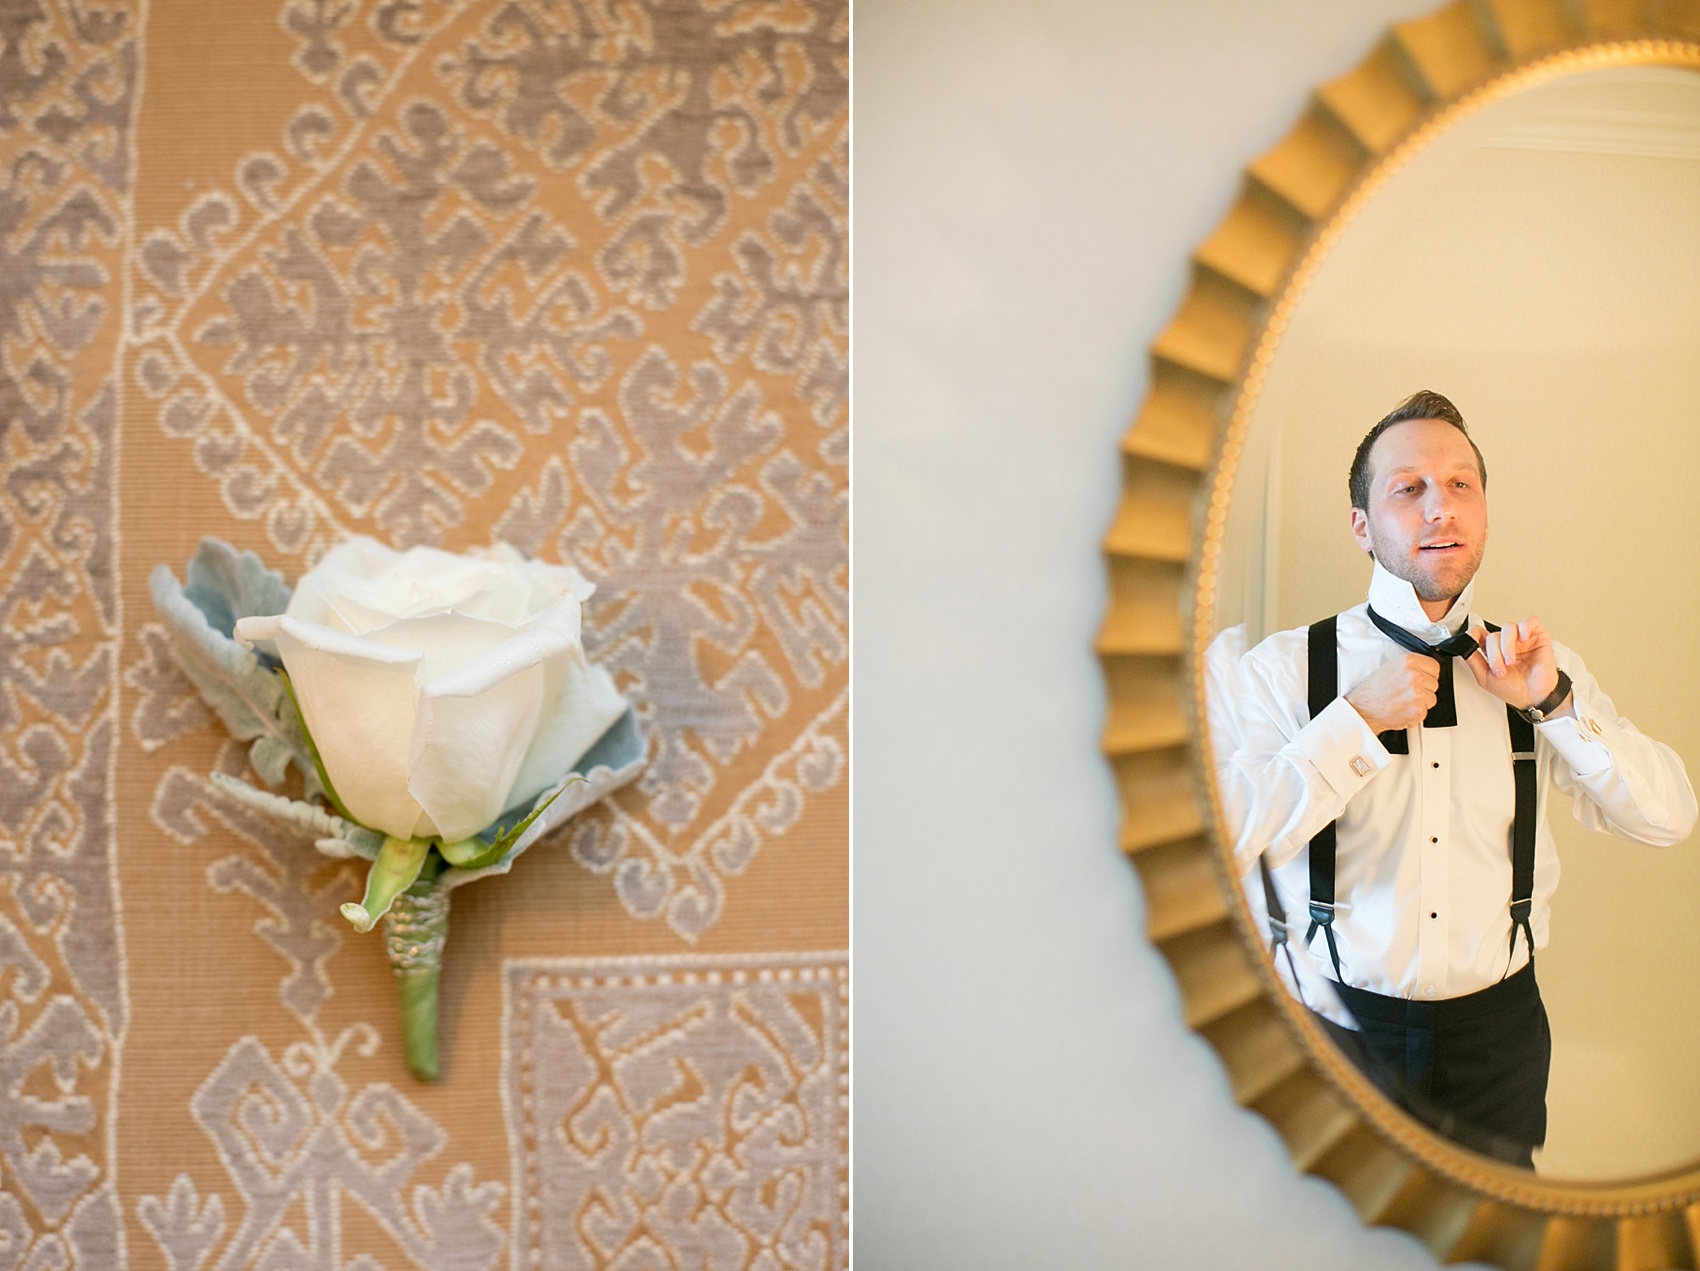 Washington, DC wedding photos by Mikkel Paige. The groom wore a white rose boutonniere at The Ritz Carlton, Pentagon City.